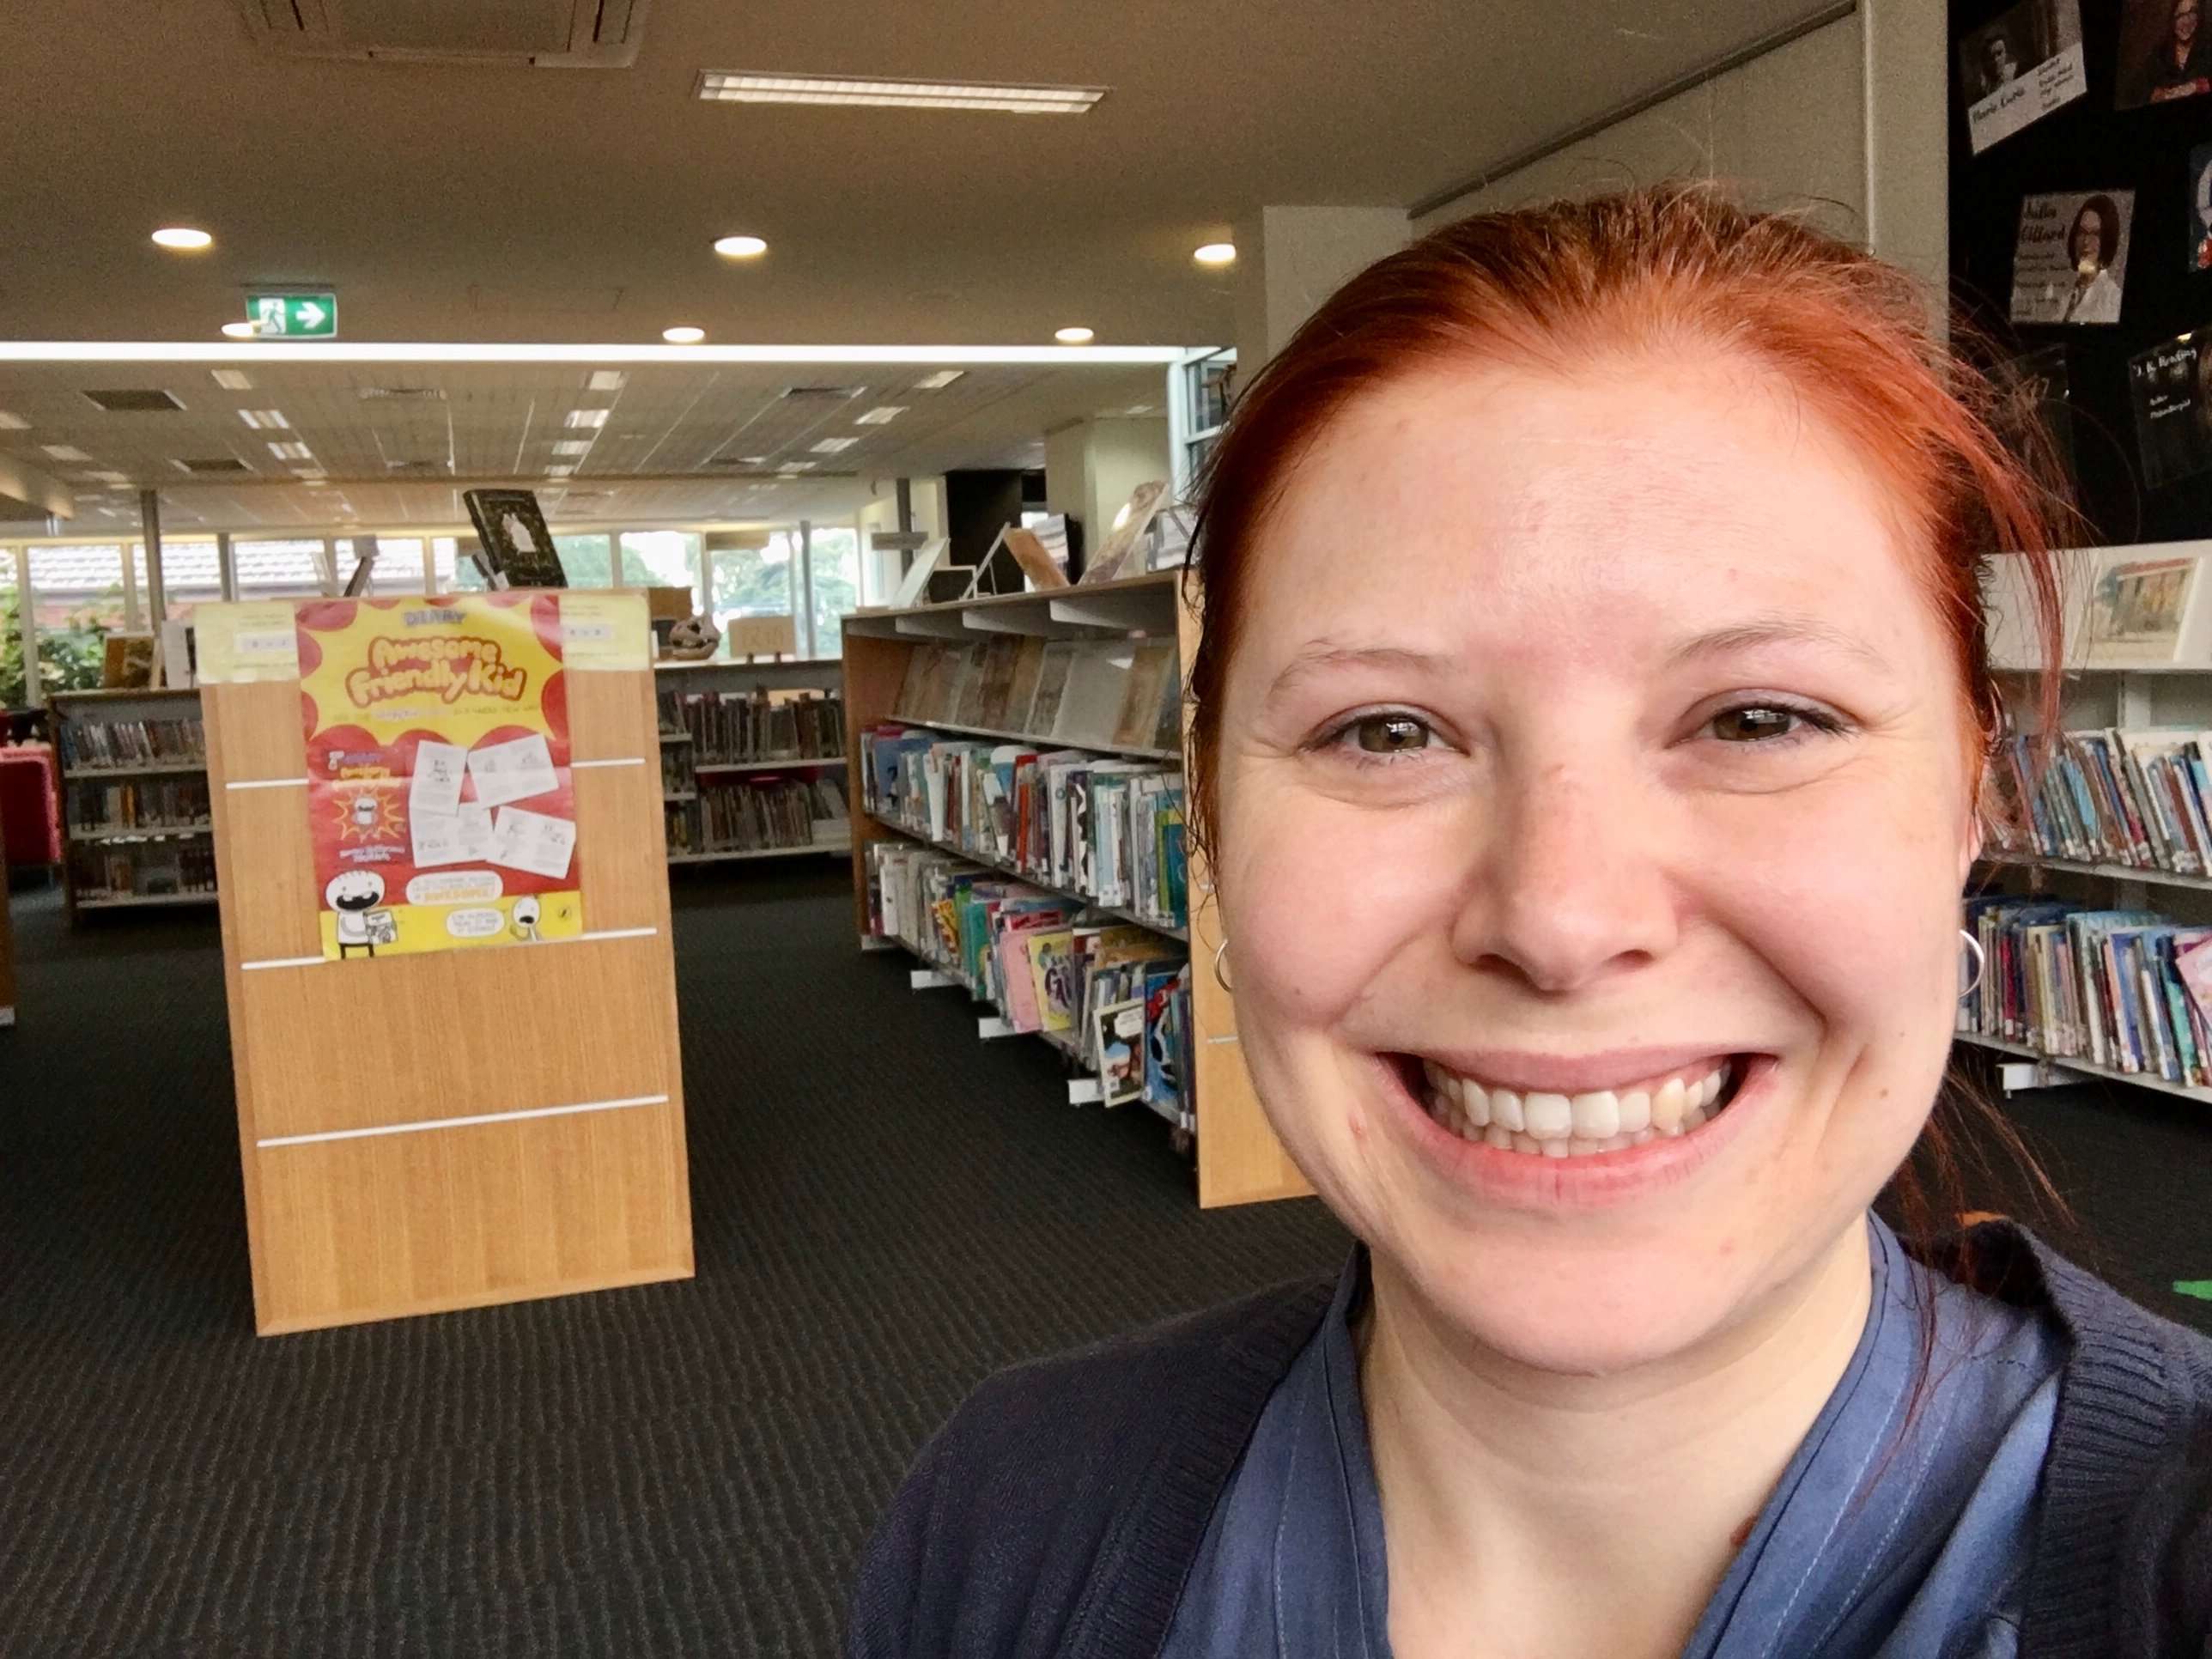 Portrait of woman in front of Library shelf